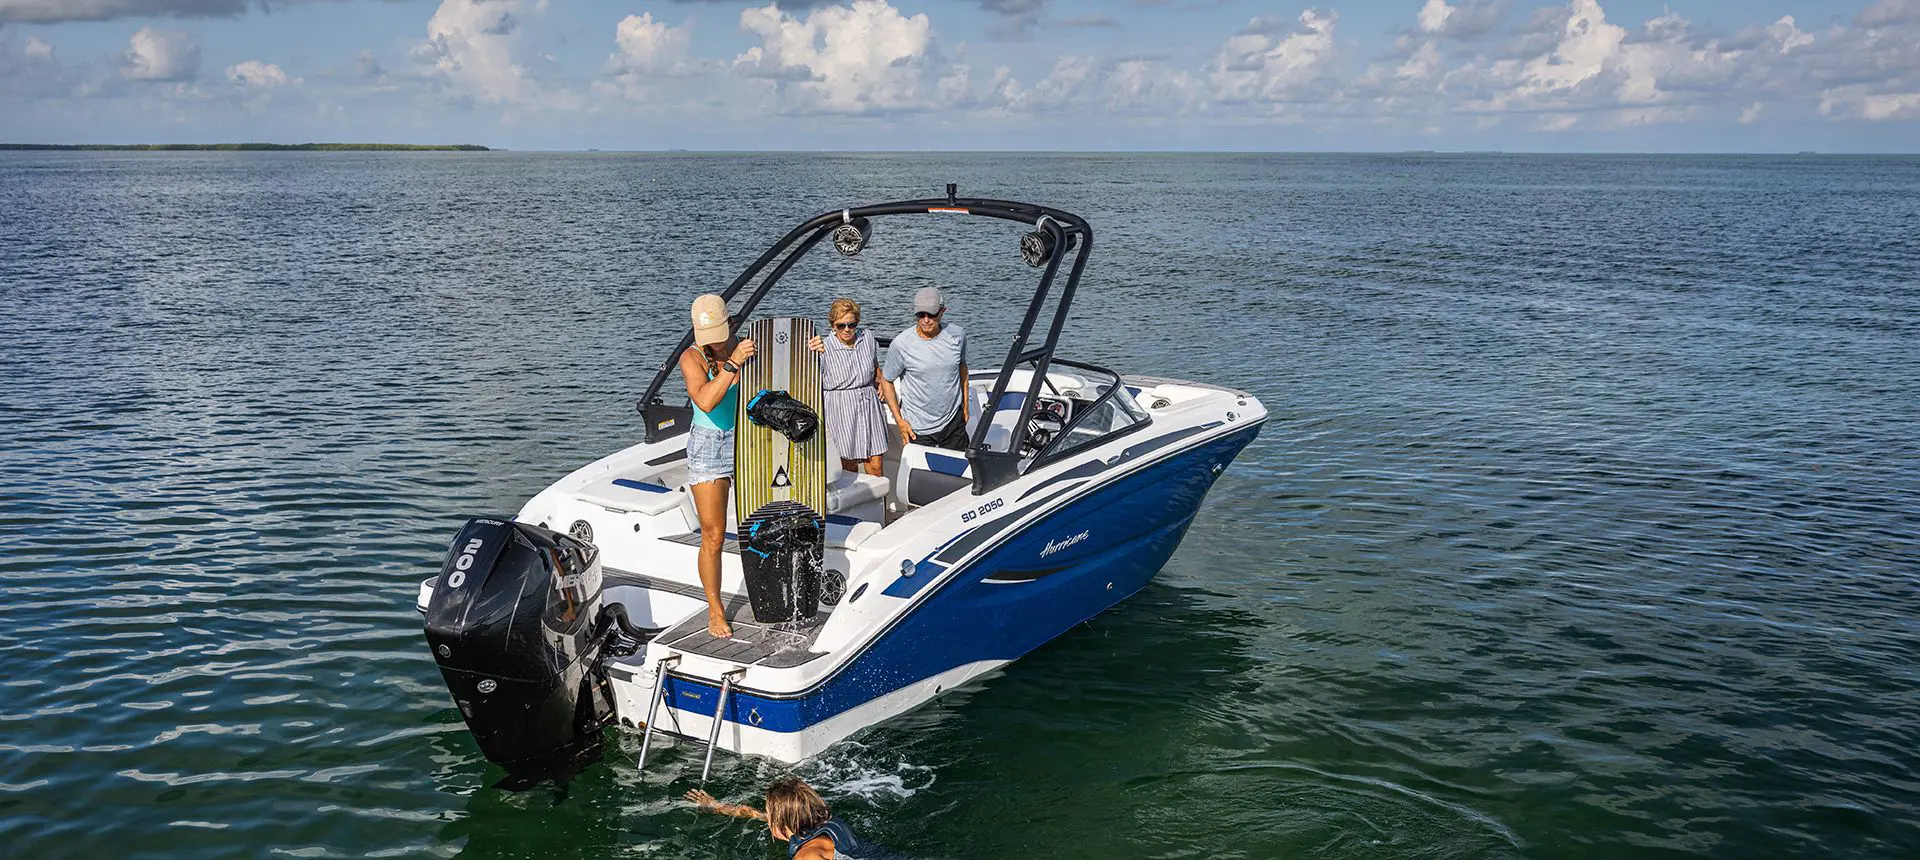 What better way to spend the day then on the water🌊come check out our  brand new 24 foot hurricane fun deck boat!🚤 • • • • �